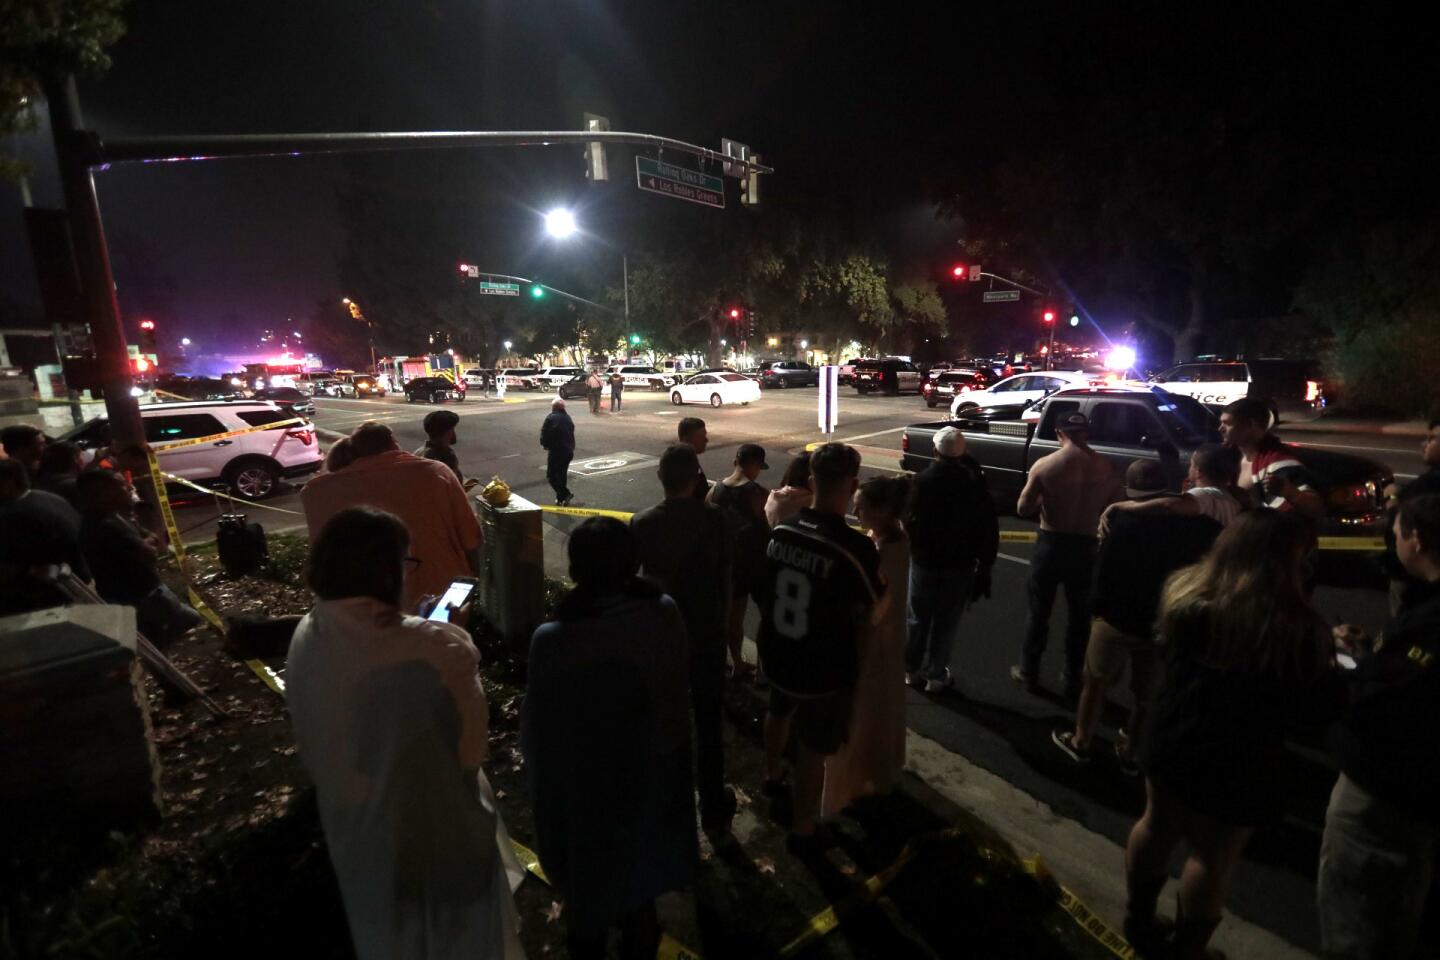 A crowd including survivors gathers at a street corner near the Borderline Bar & Grill.